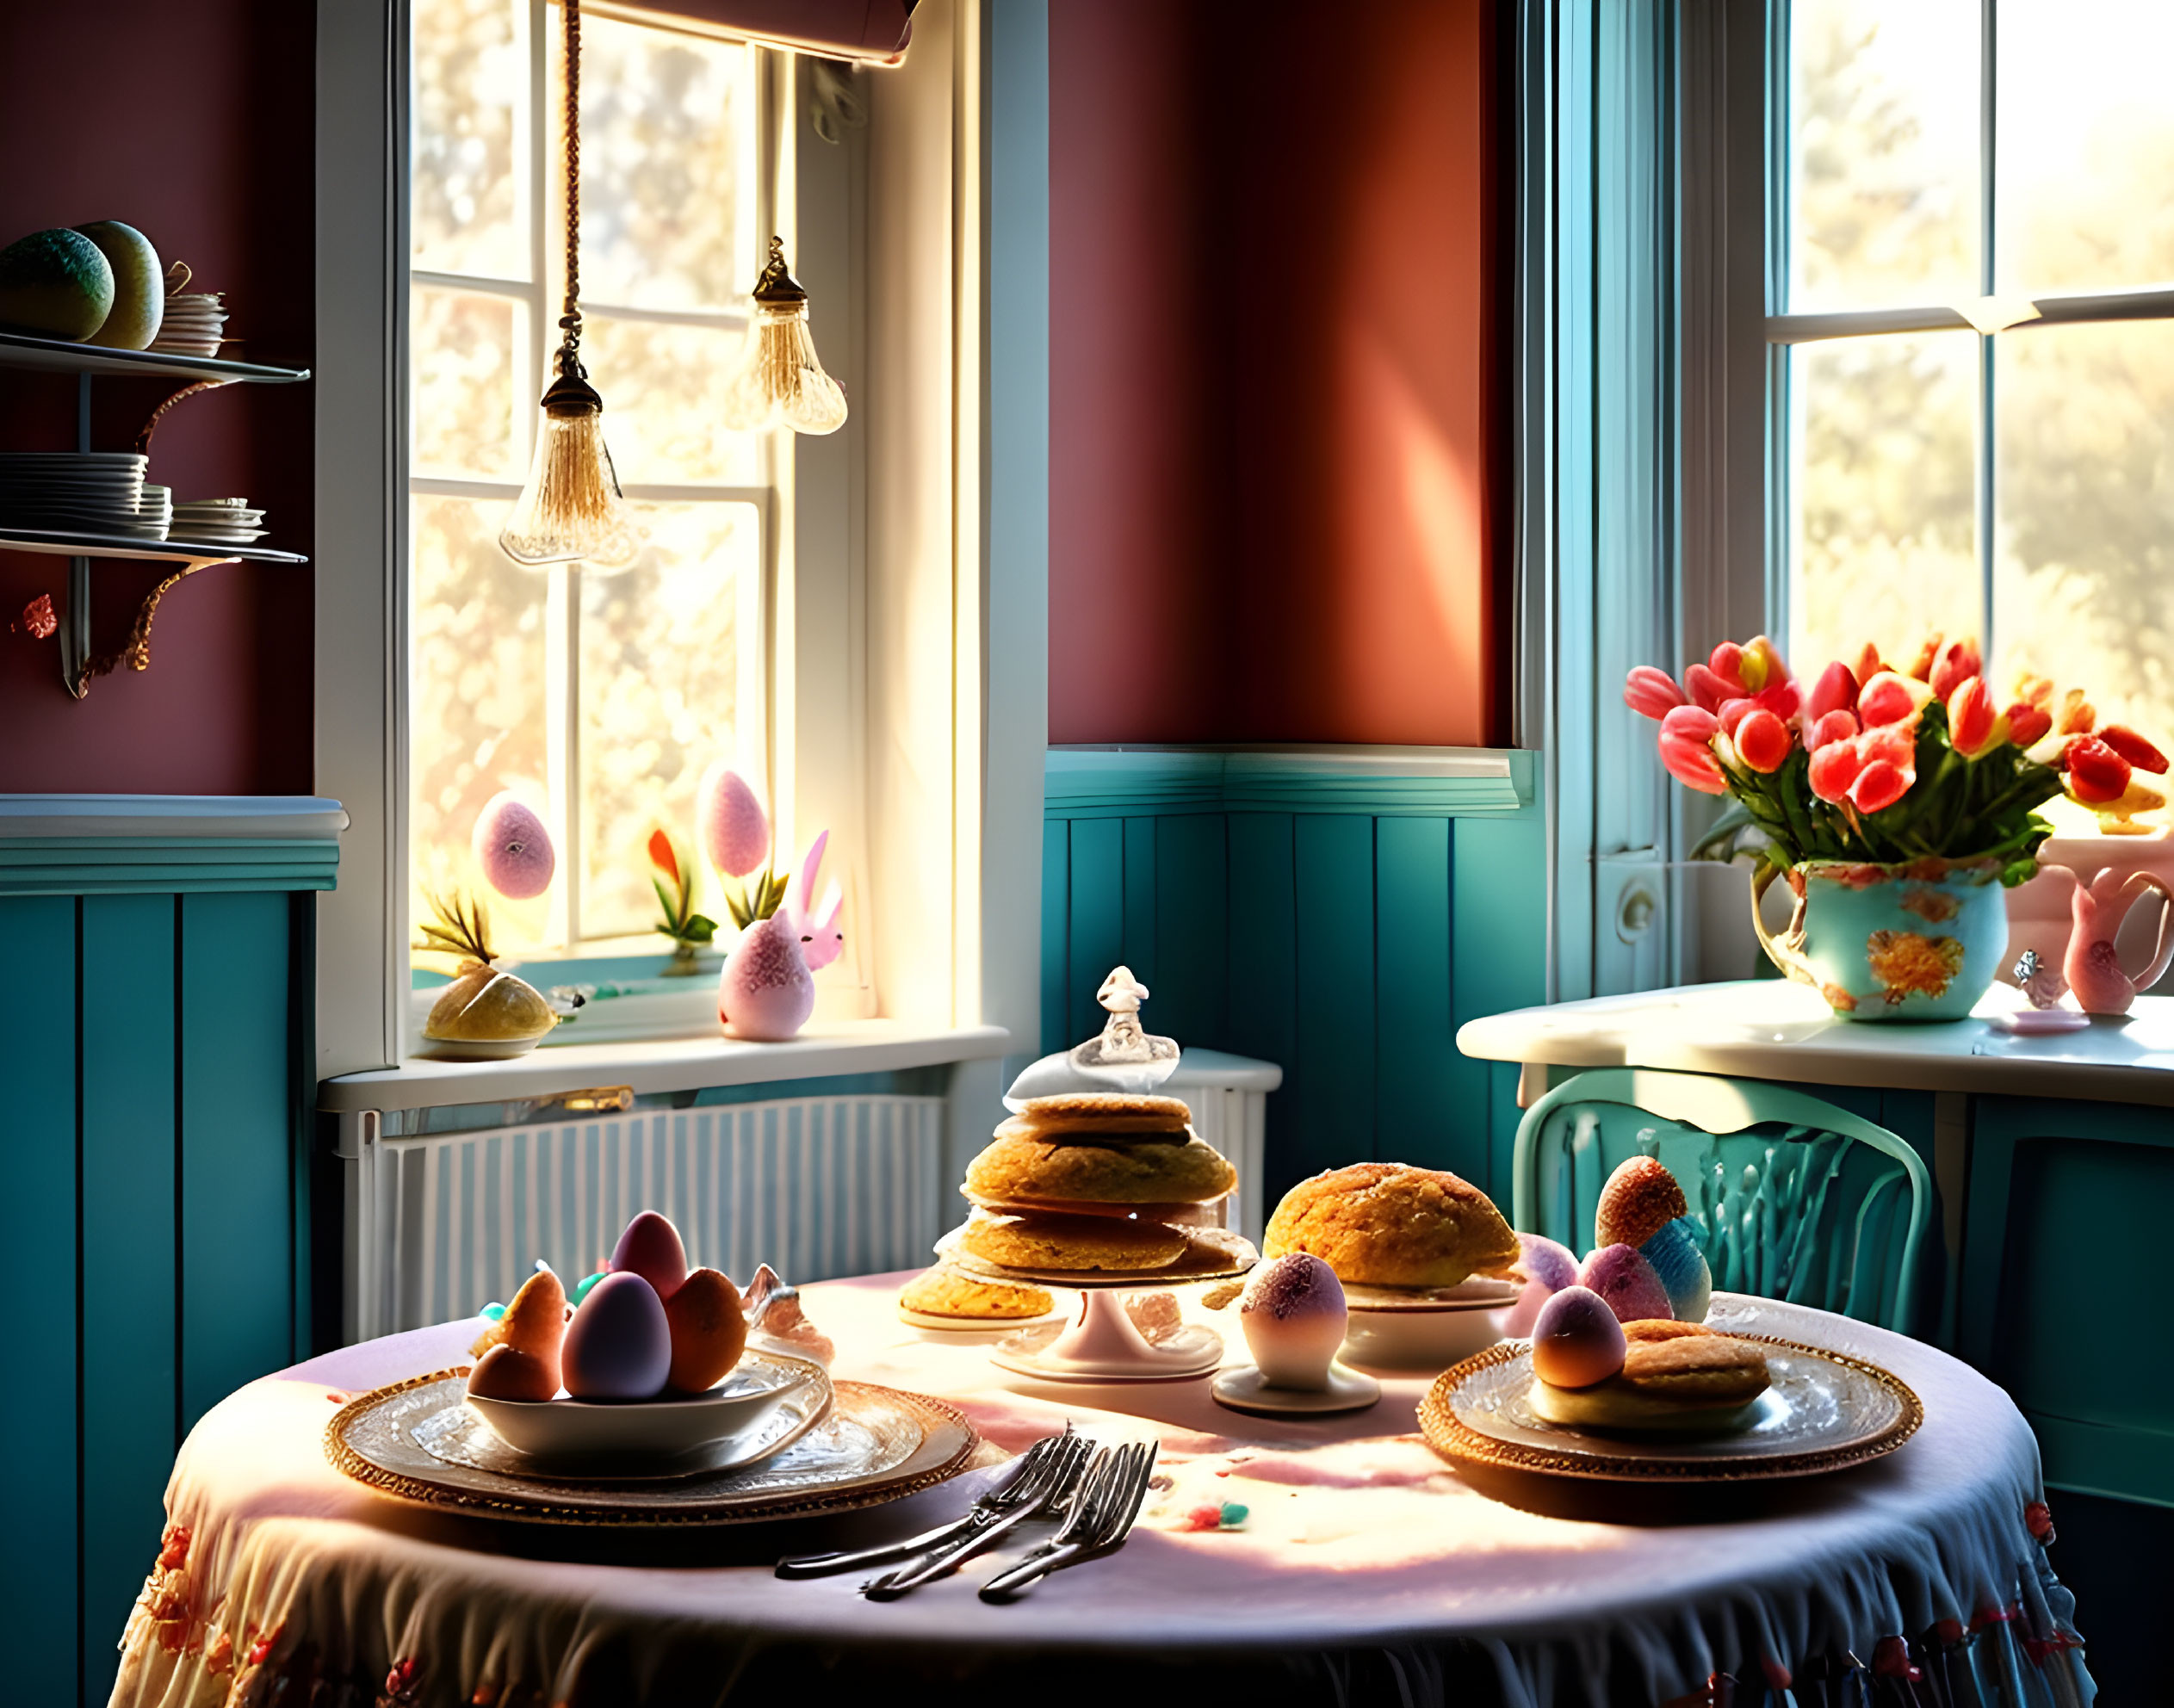 Sunlit Breakfast Nook with Pancakes, Eggs, Pastries, and Tulips